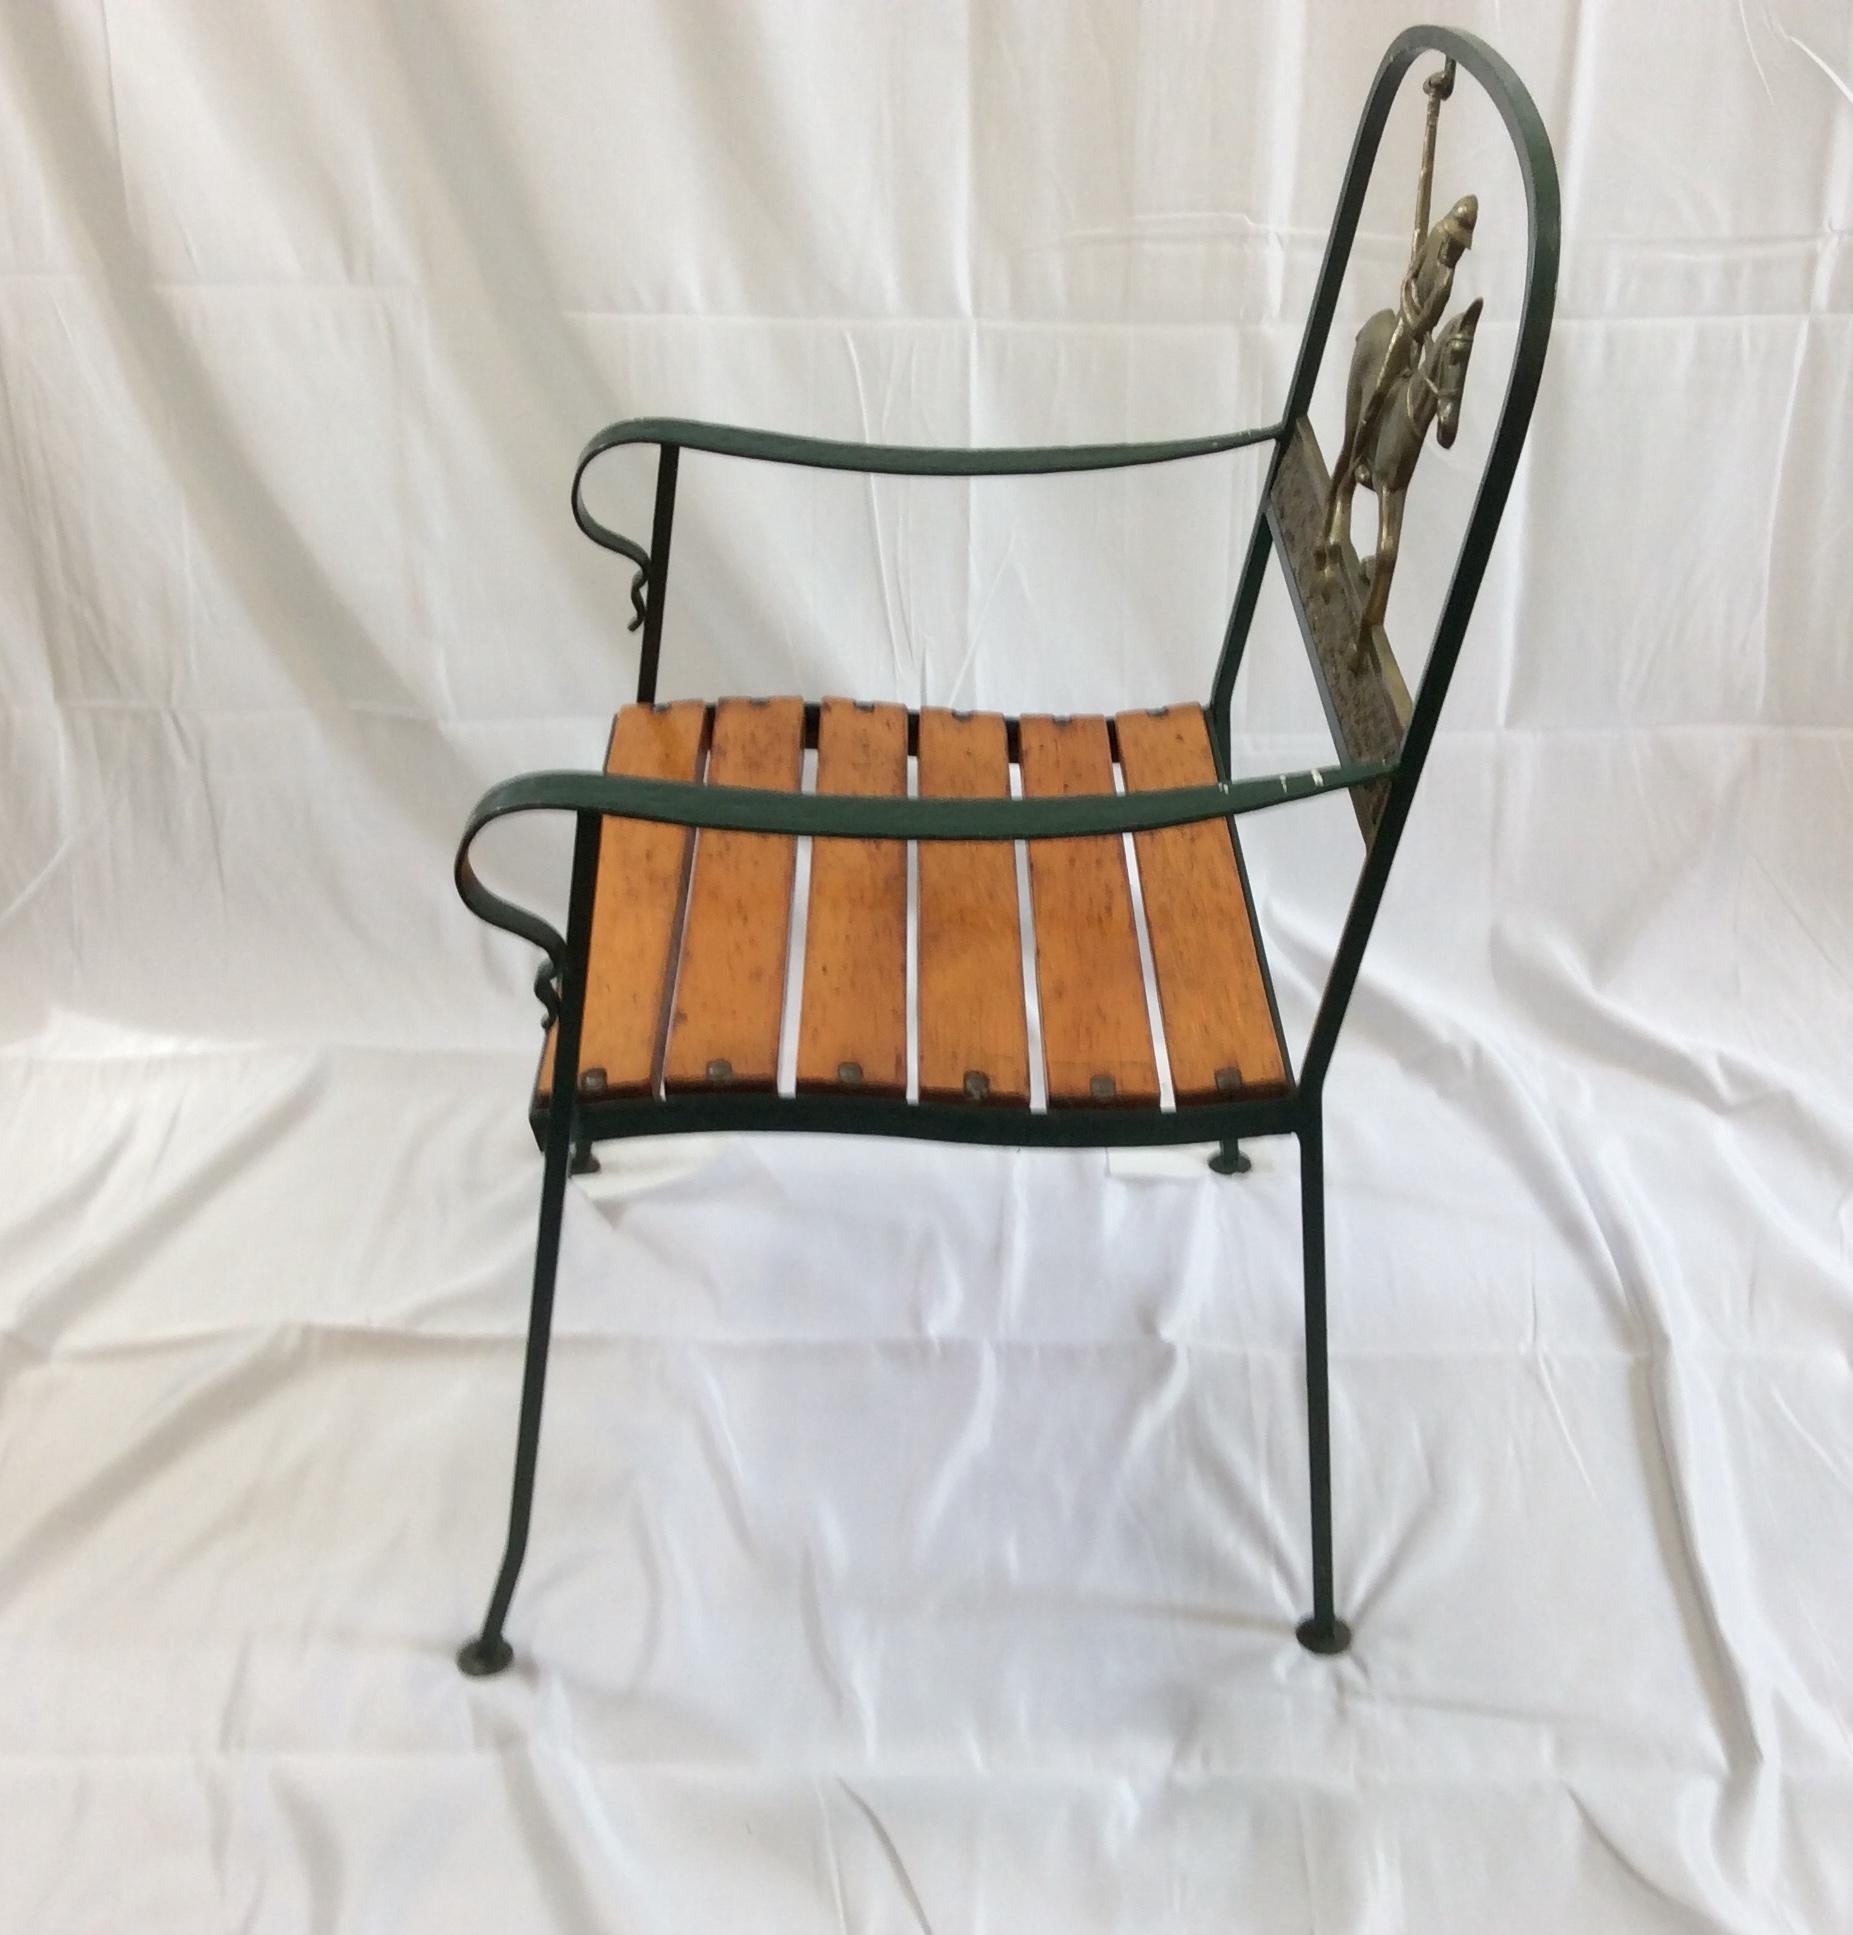 American Florentine Craftsmen Polo Player Back Wrought Iron Armchair Made for MJ Knoud For Sale